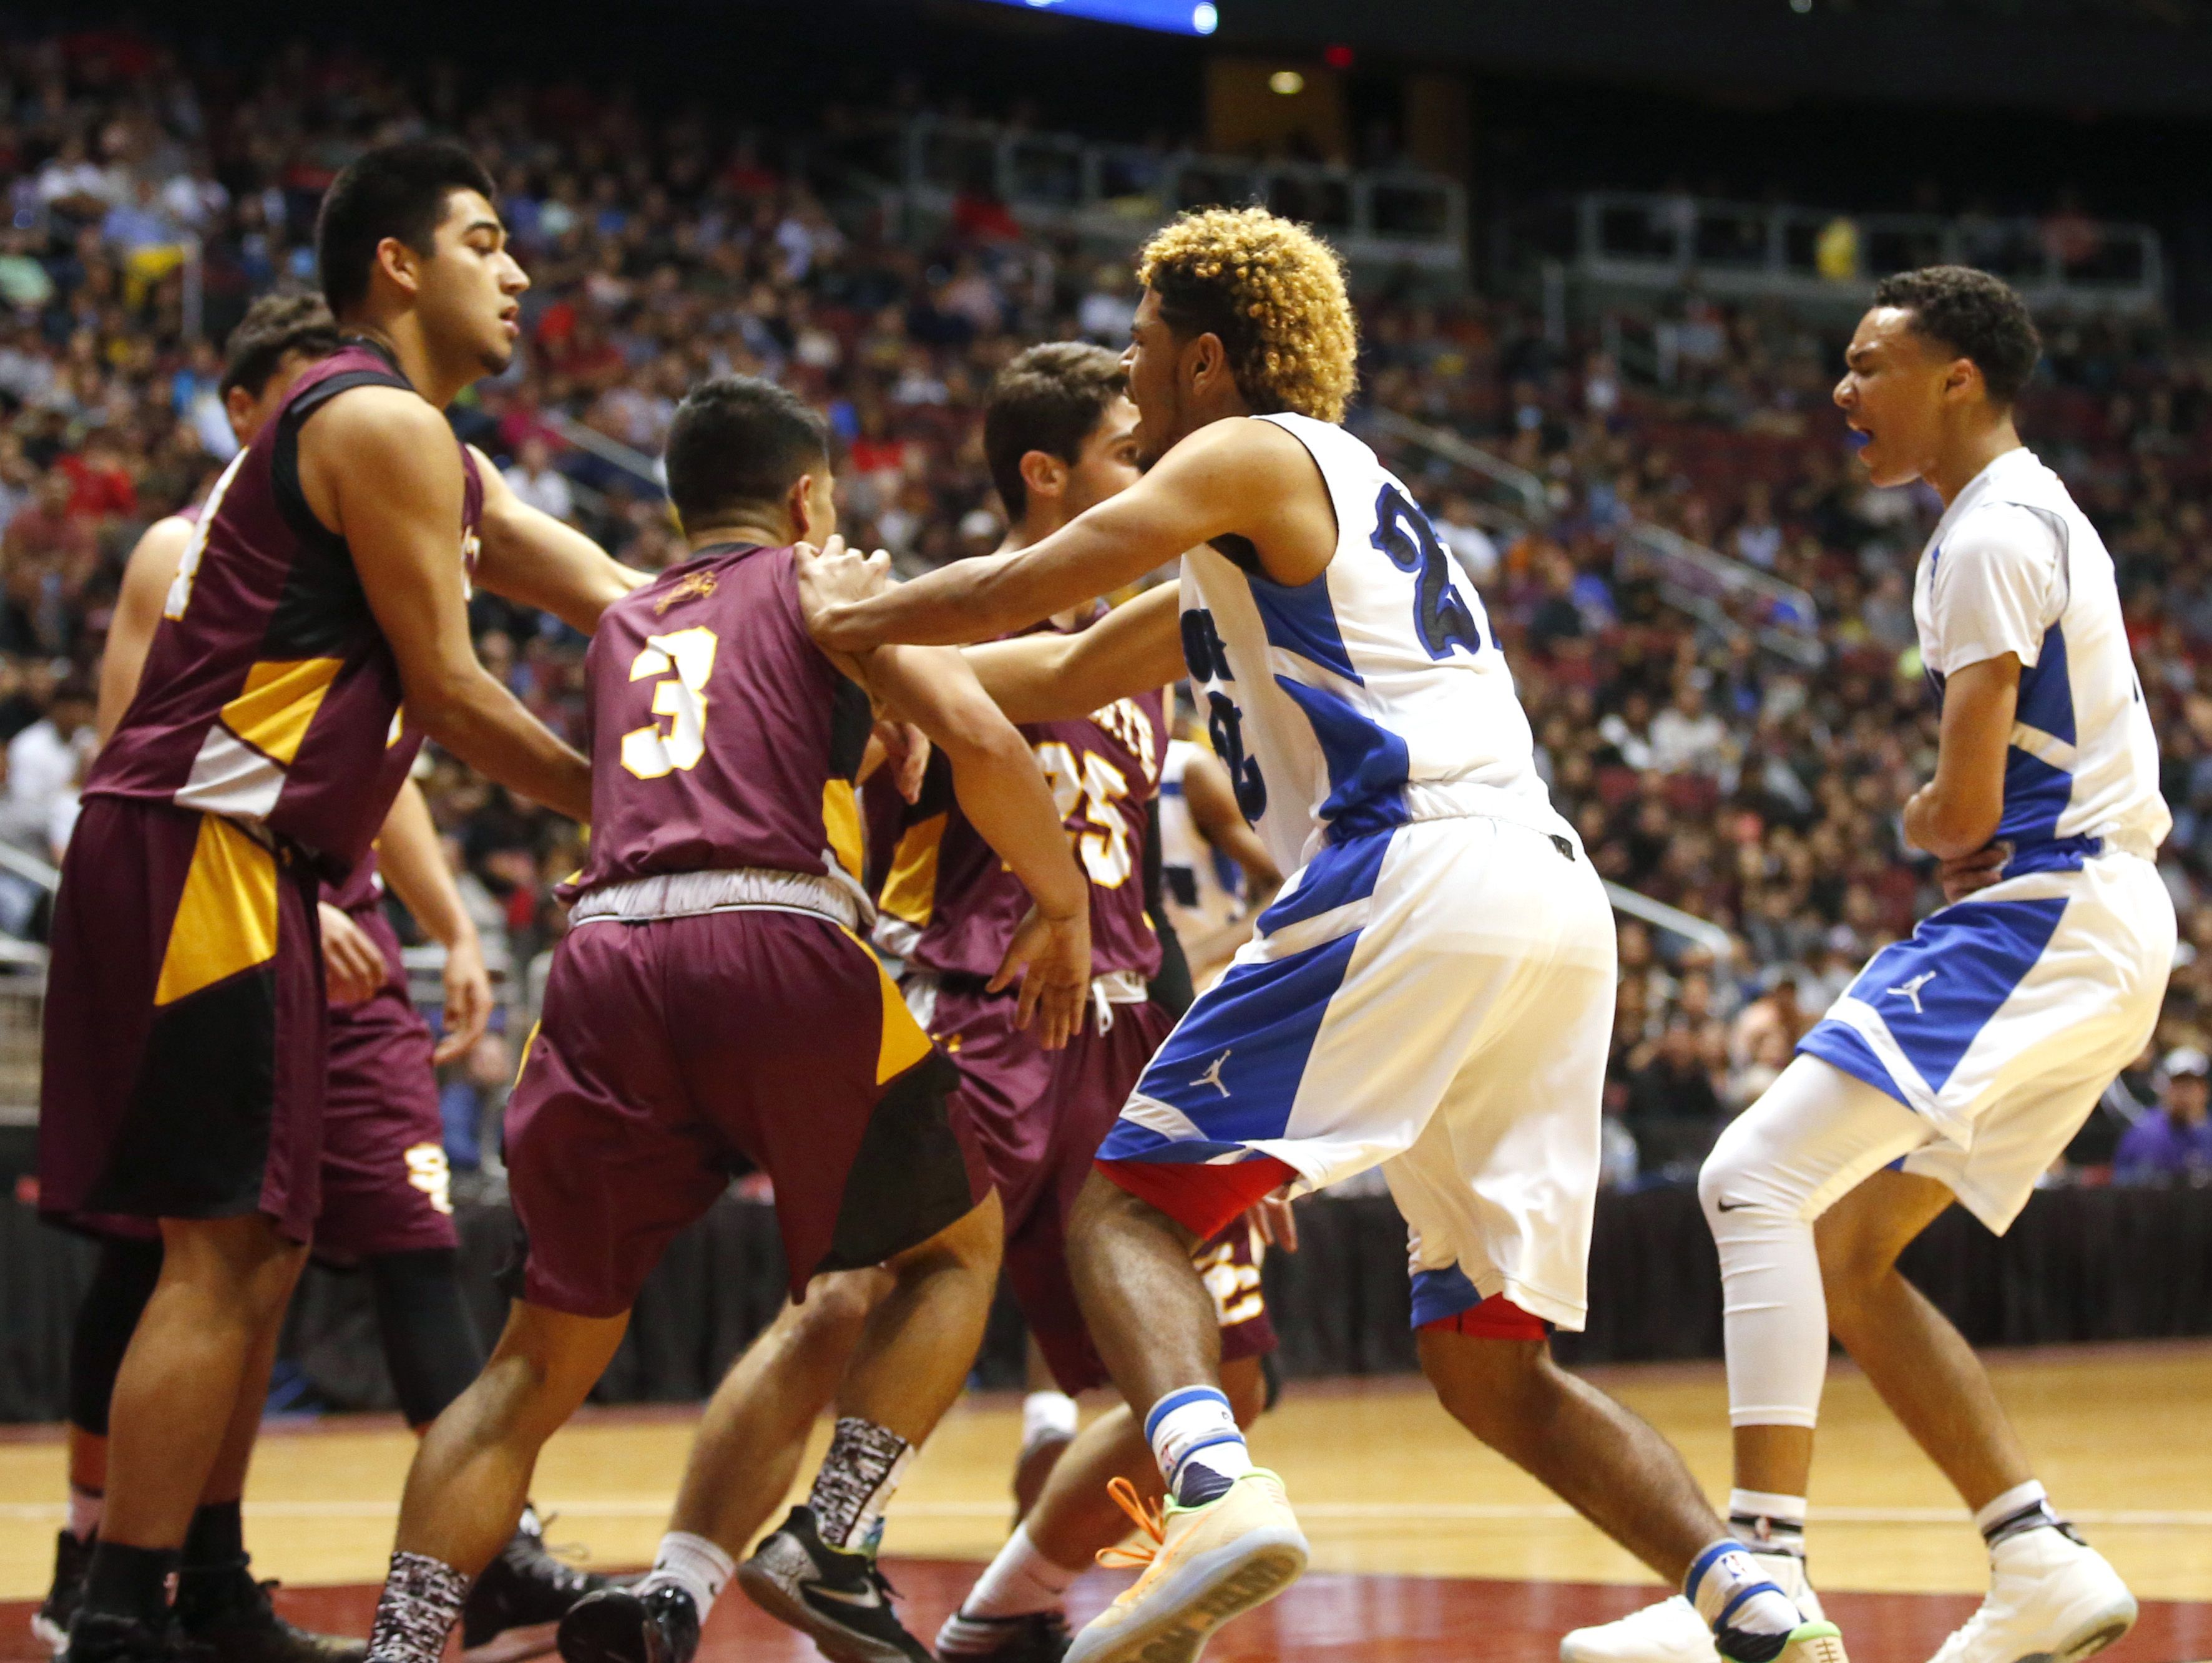 Skirmish on the court during the high school boys basketball: 4A Conference state championship game Salpointe verses Shadow Mountain at Gila River Arena in Glendale on February 25, 2017. Salpointe Isaac Cruz (3) and Shadow Mountain Jaelen House (2) were both ejected.